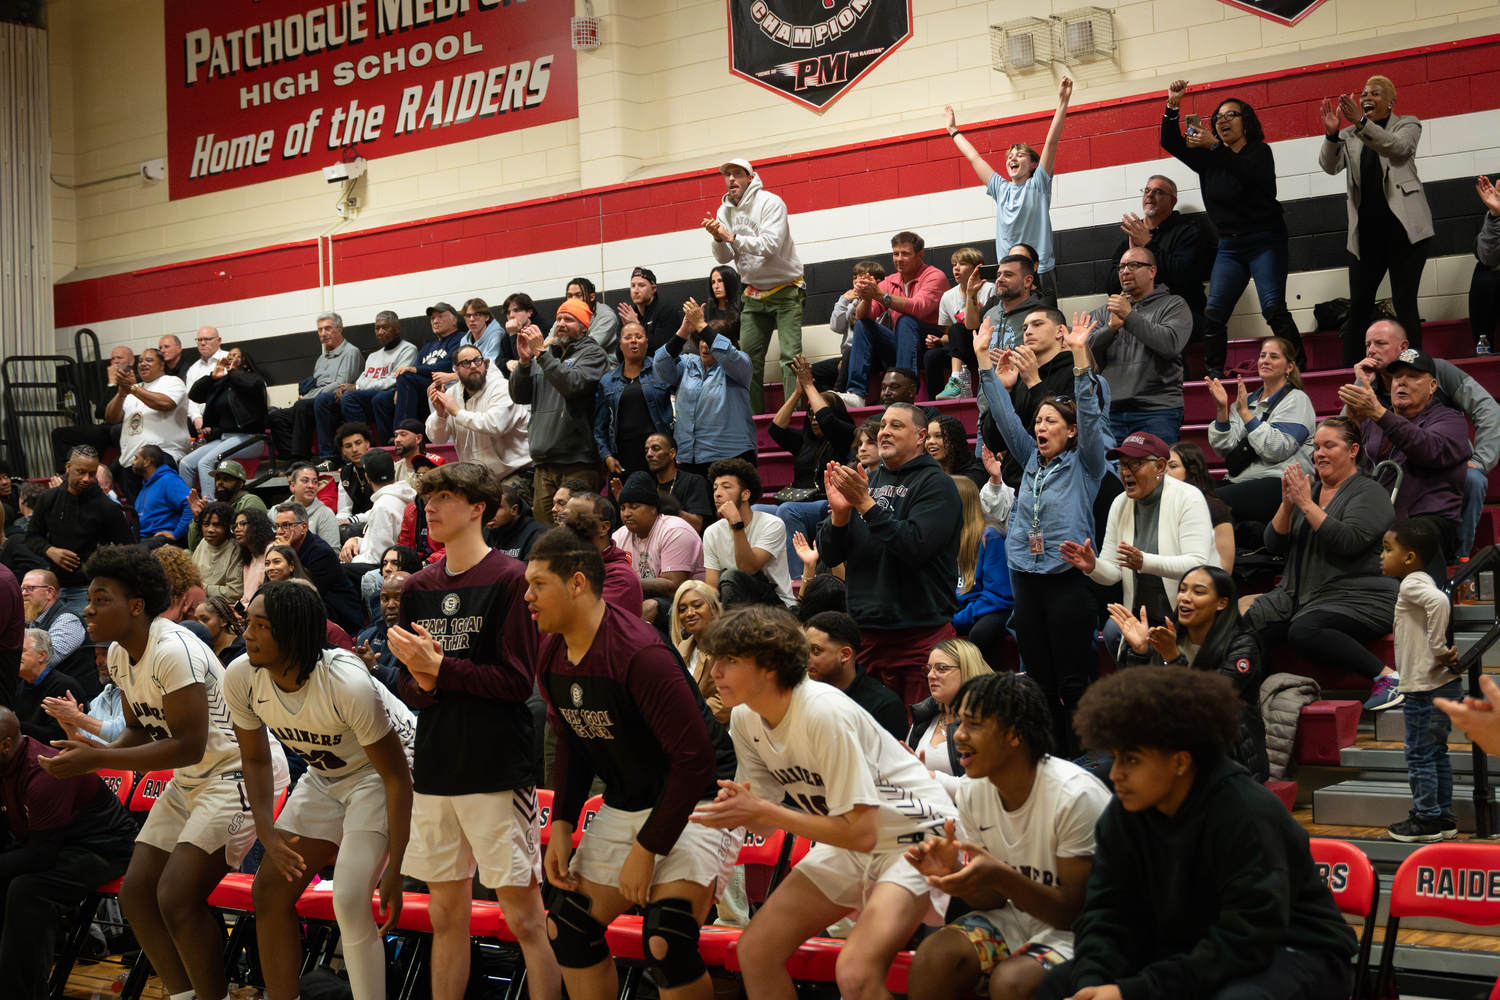 The Southampton crowd at Patchogue-Medford High School on Tuesday night gives a good ovation to its team.  RON ESPOSITO